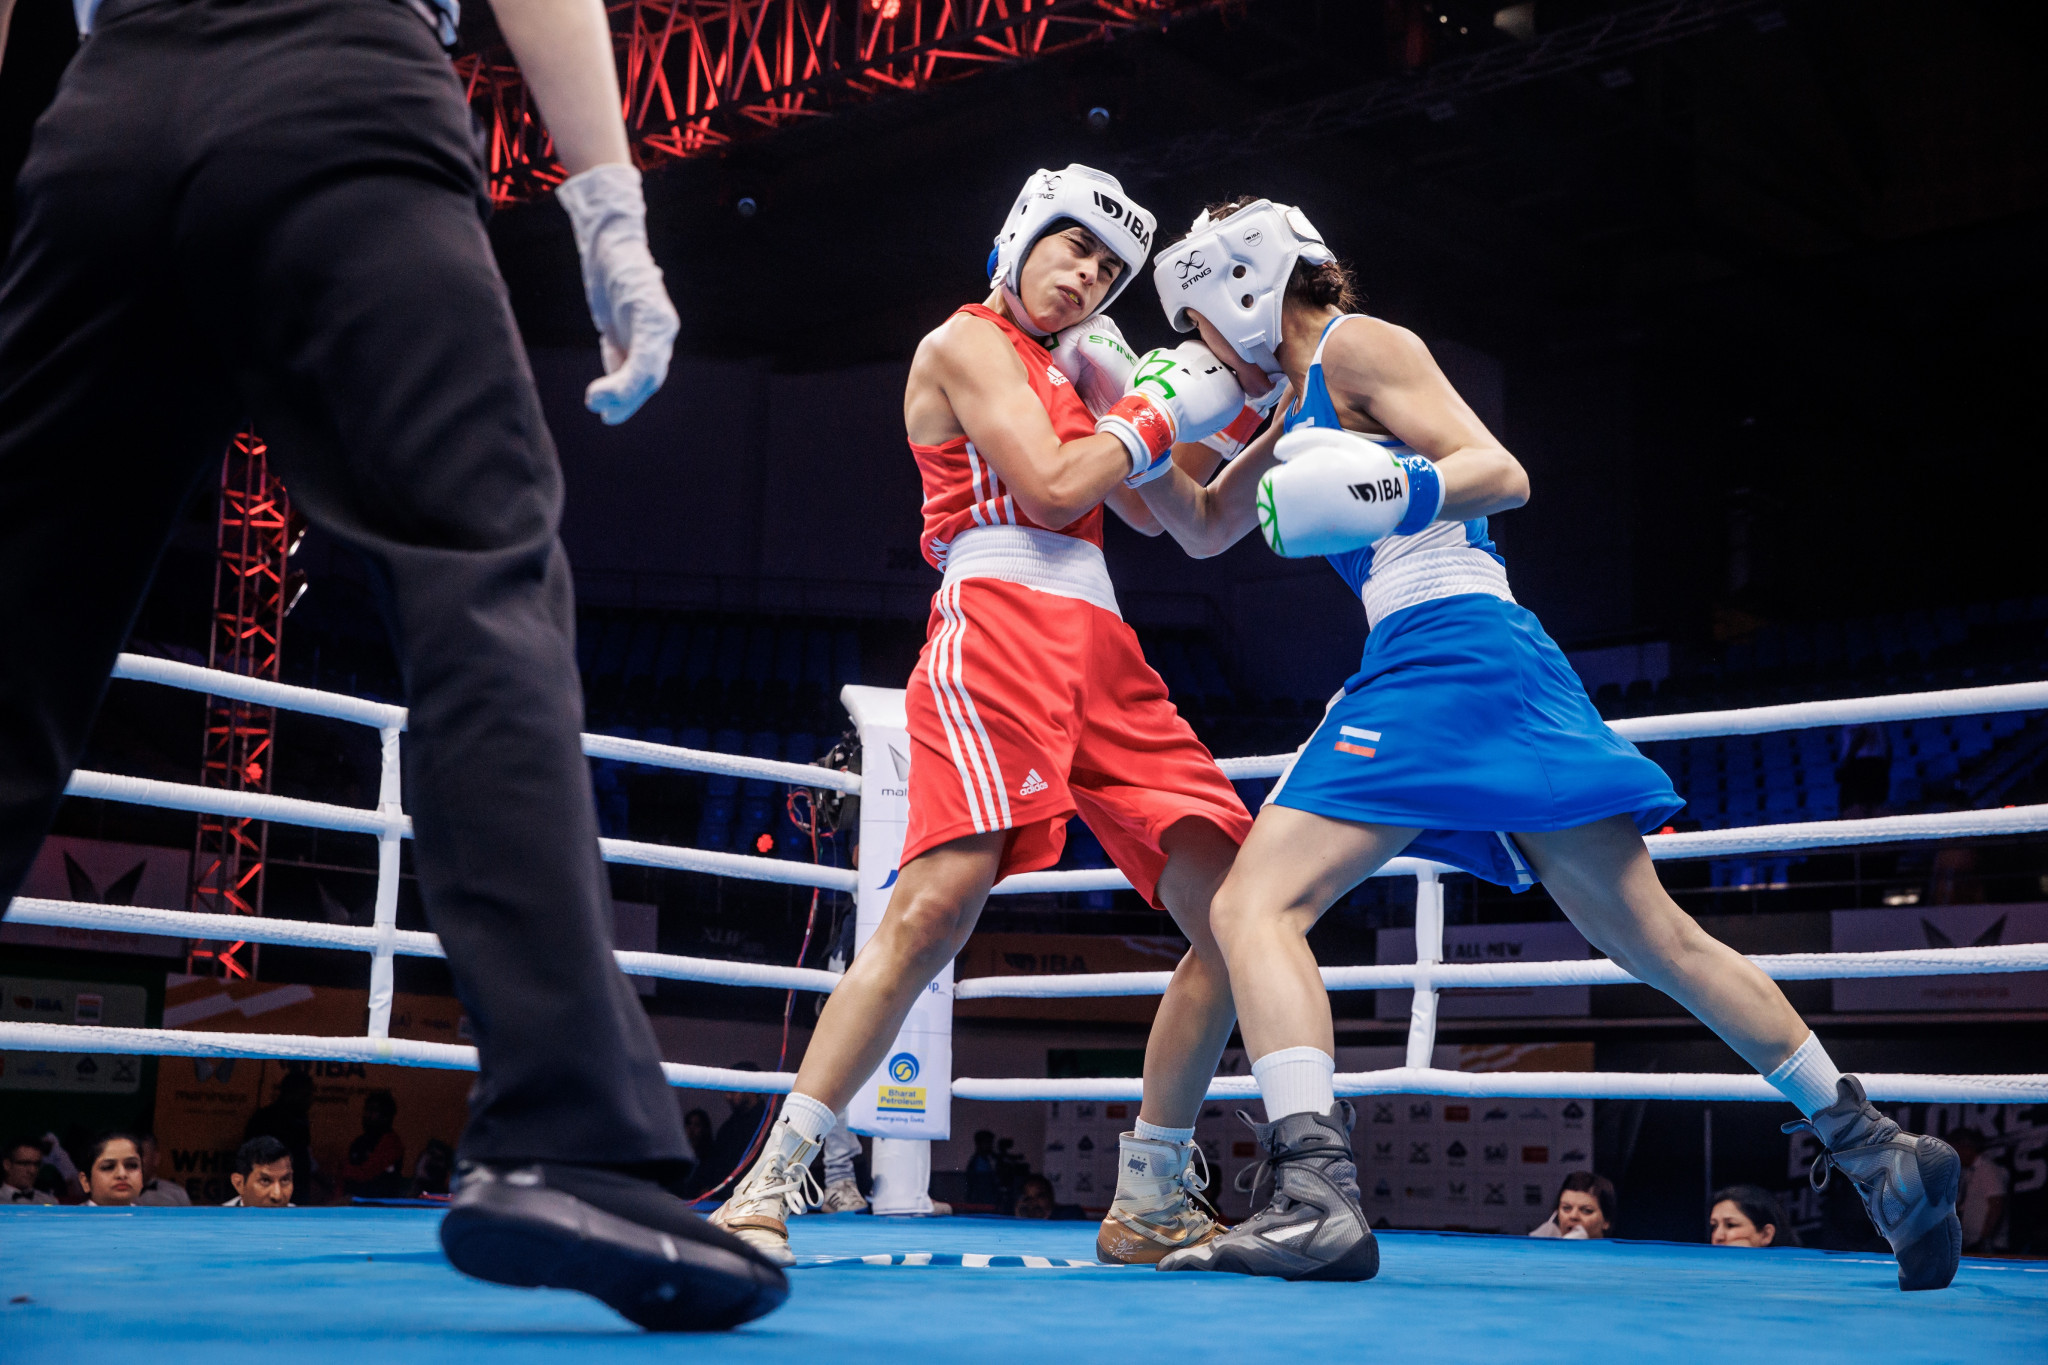 France’s Amina Zidani and Russia's Liudmila Vorontsova land shots at the same time in their featherweight bout ©IBA